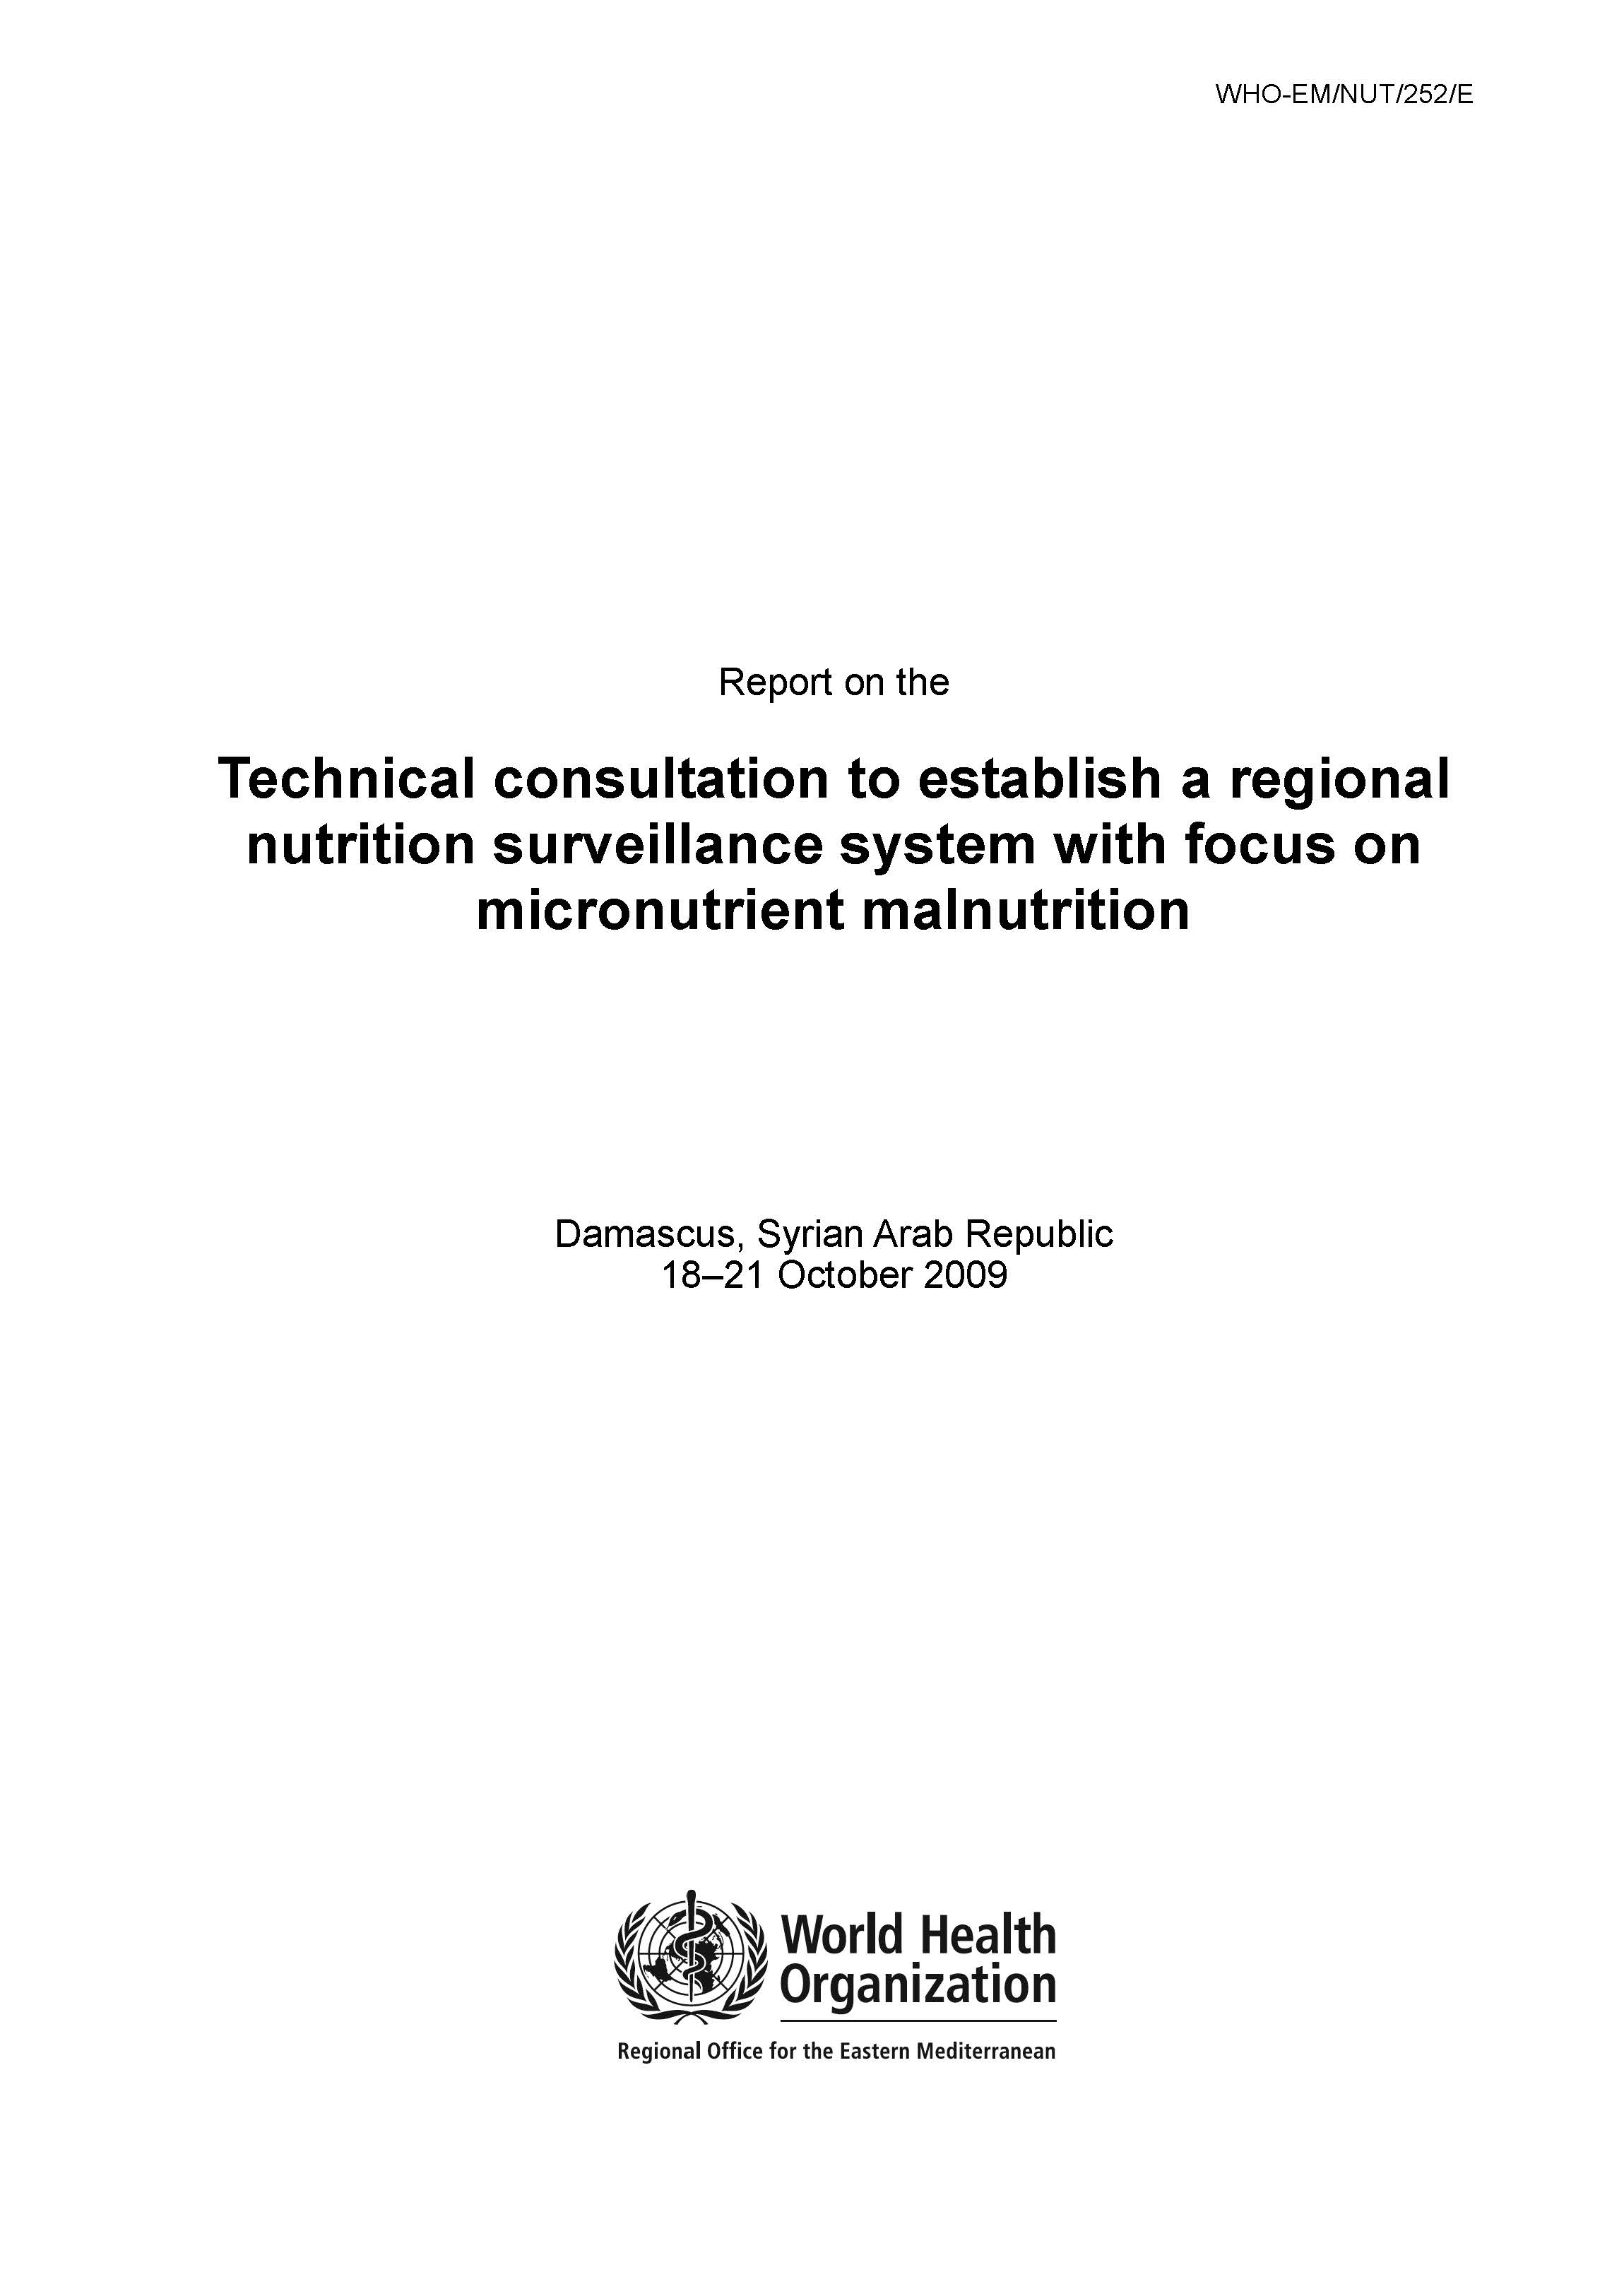 report_on_the_technical_consultation_to_establish_a_regional_nutrition_surveillance_system